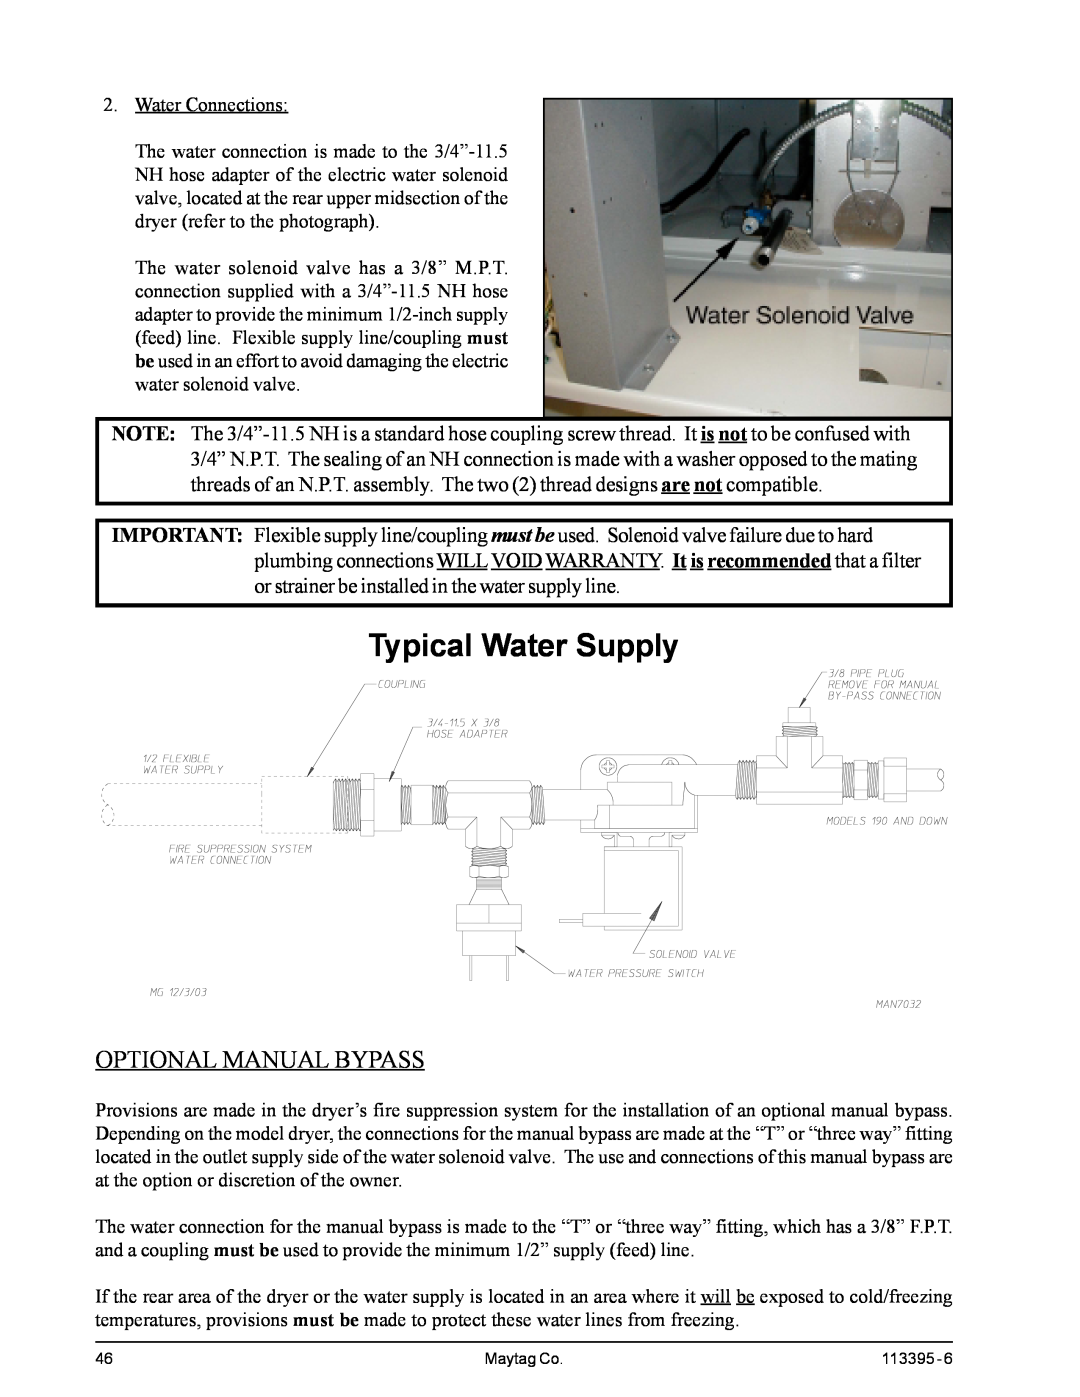 American Dryer Corp MD-170PTVW, MDG-120PVV installation manual Typical Water Supply, Optional Manual Bypass 